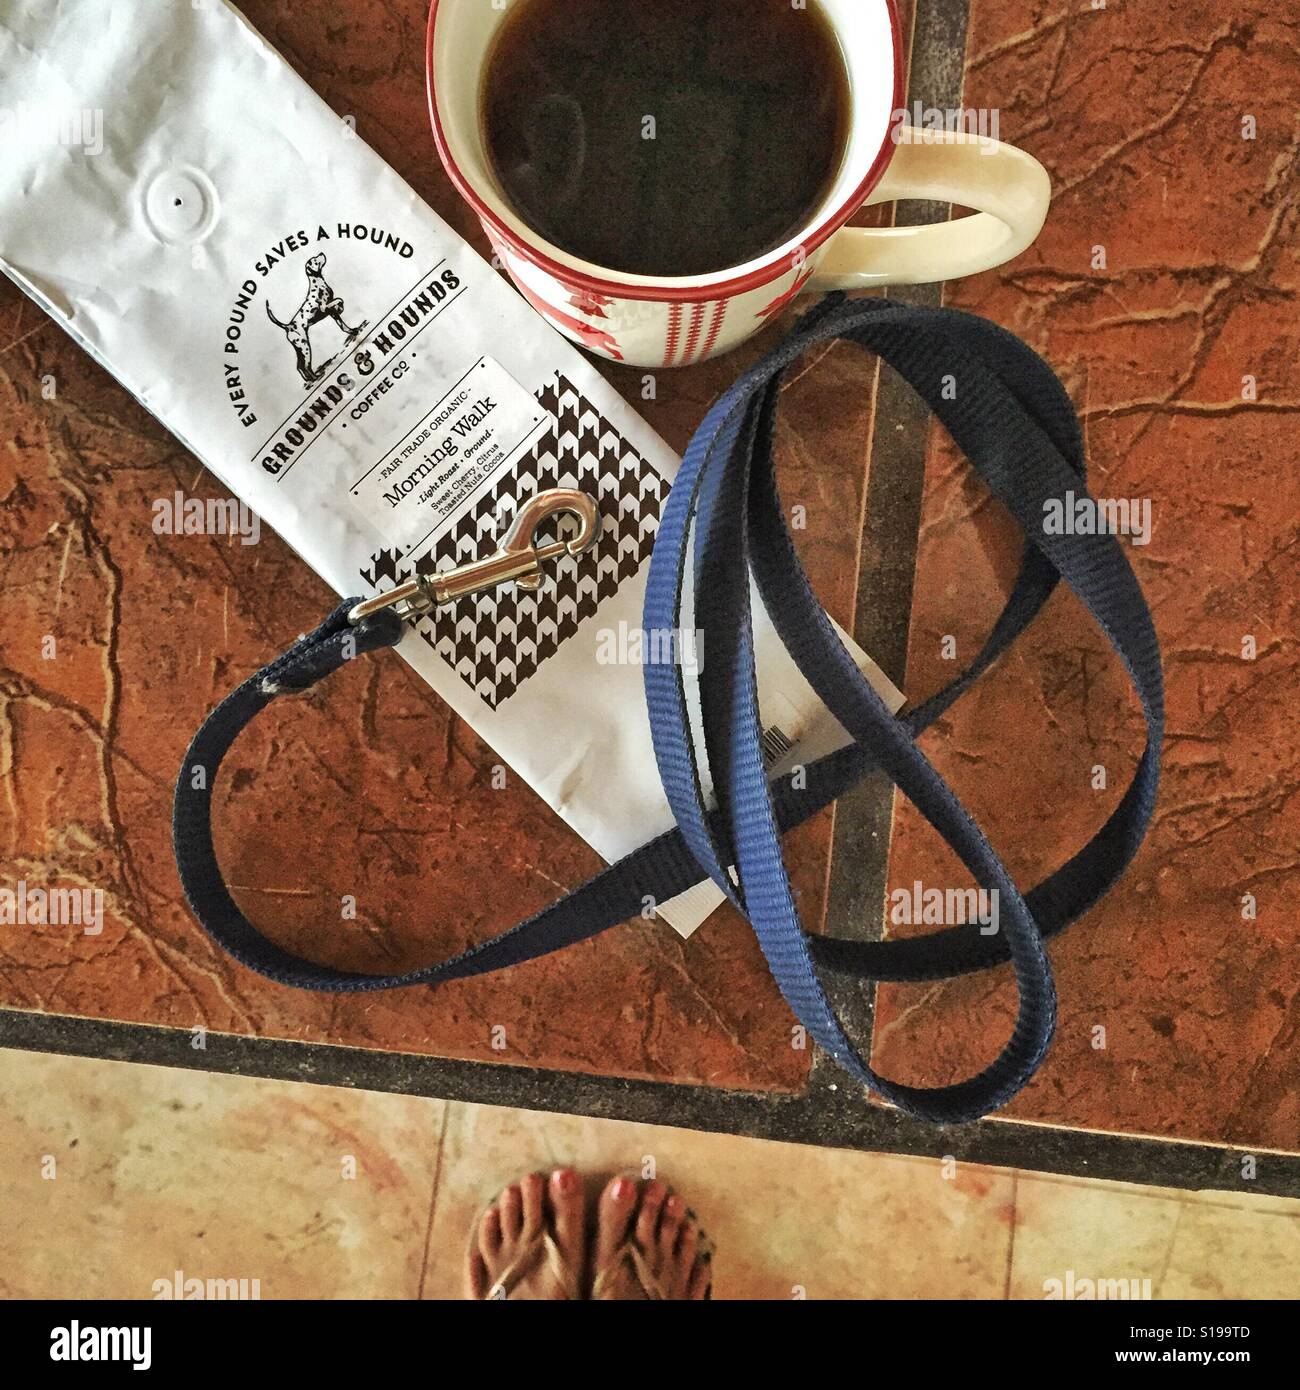 A cup of coffee sits on a counter with a leash and an empty bag of Grounds and Hounds Morning Walk blend coffee with a woman's feet visible below the counter. Stock Photo